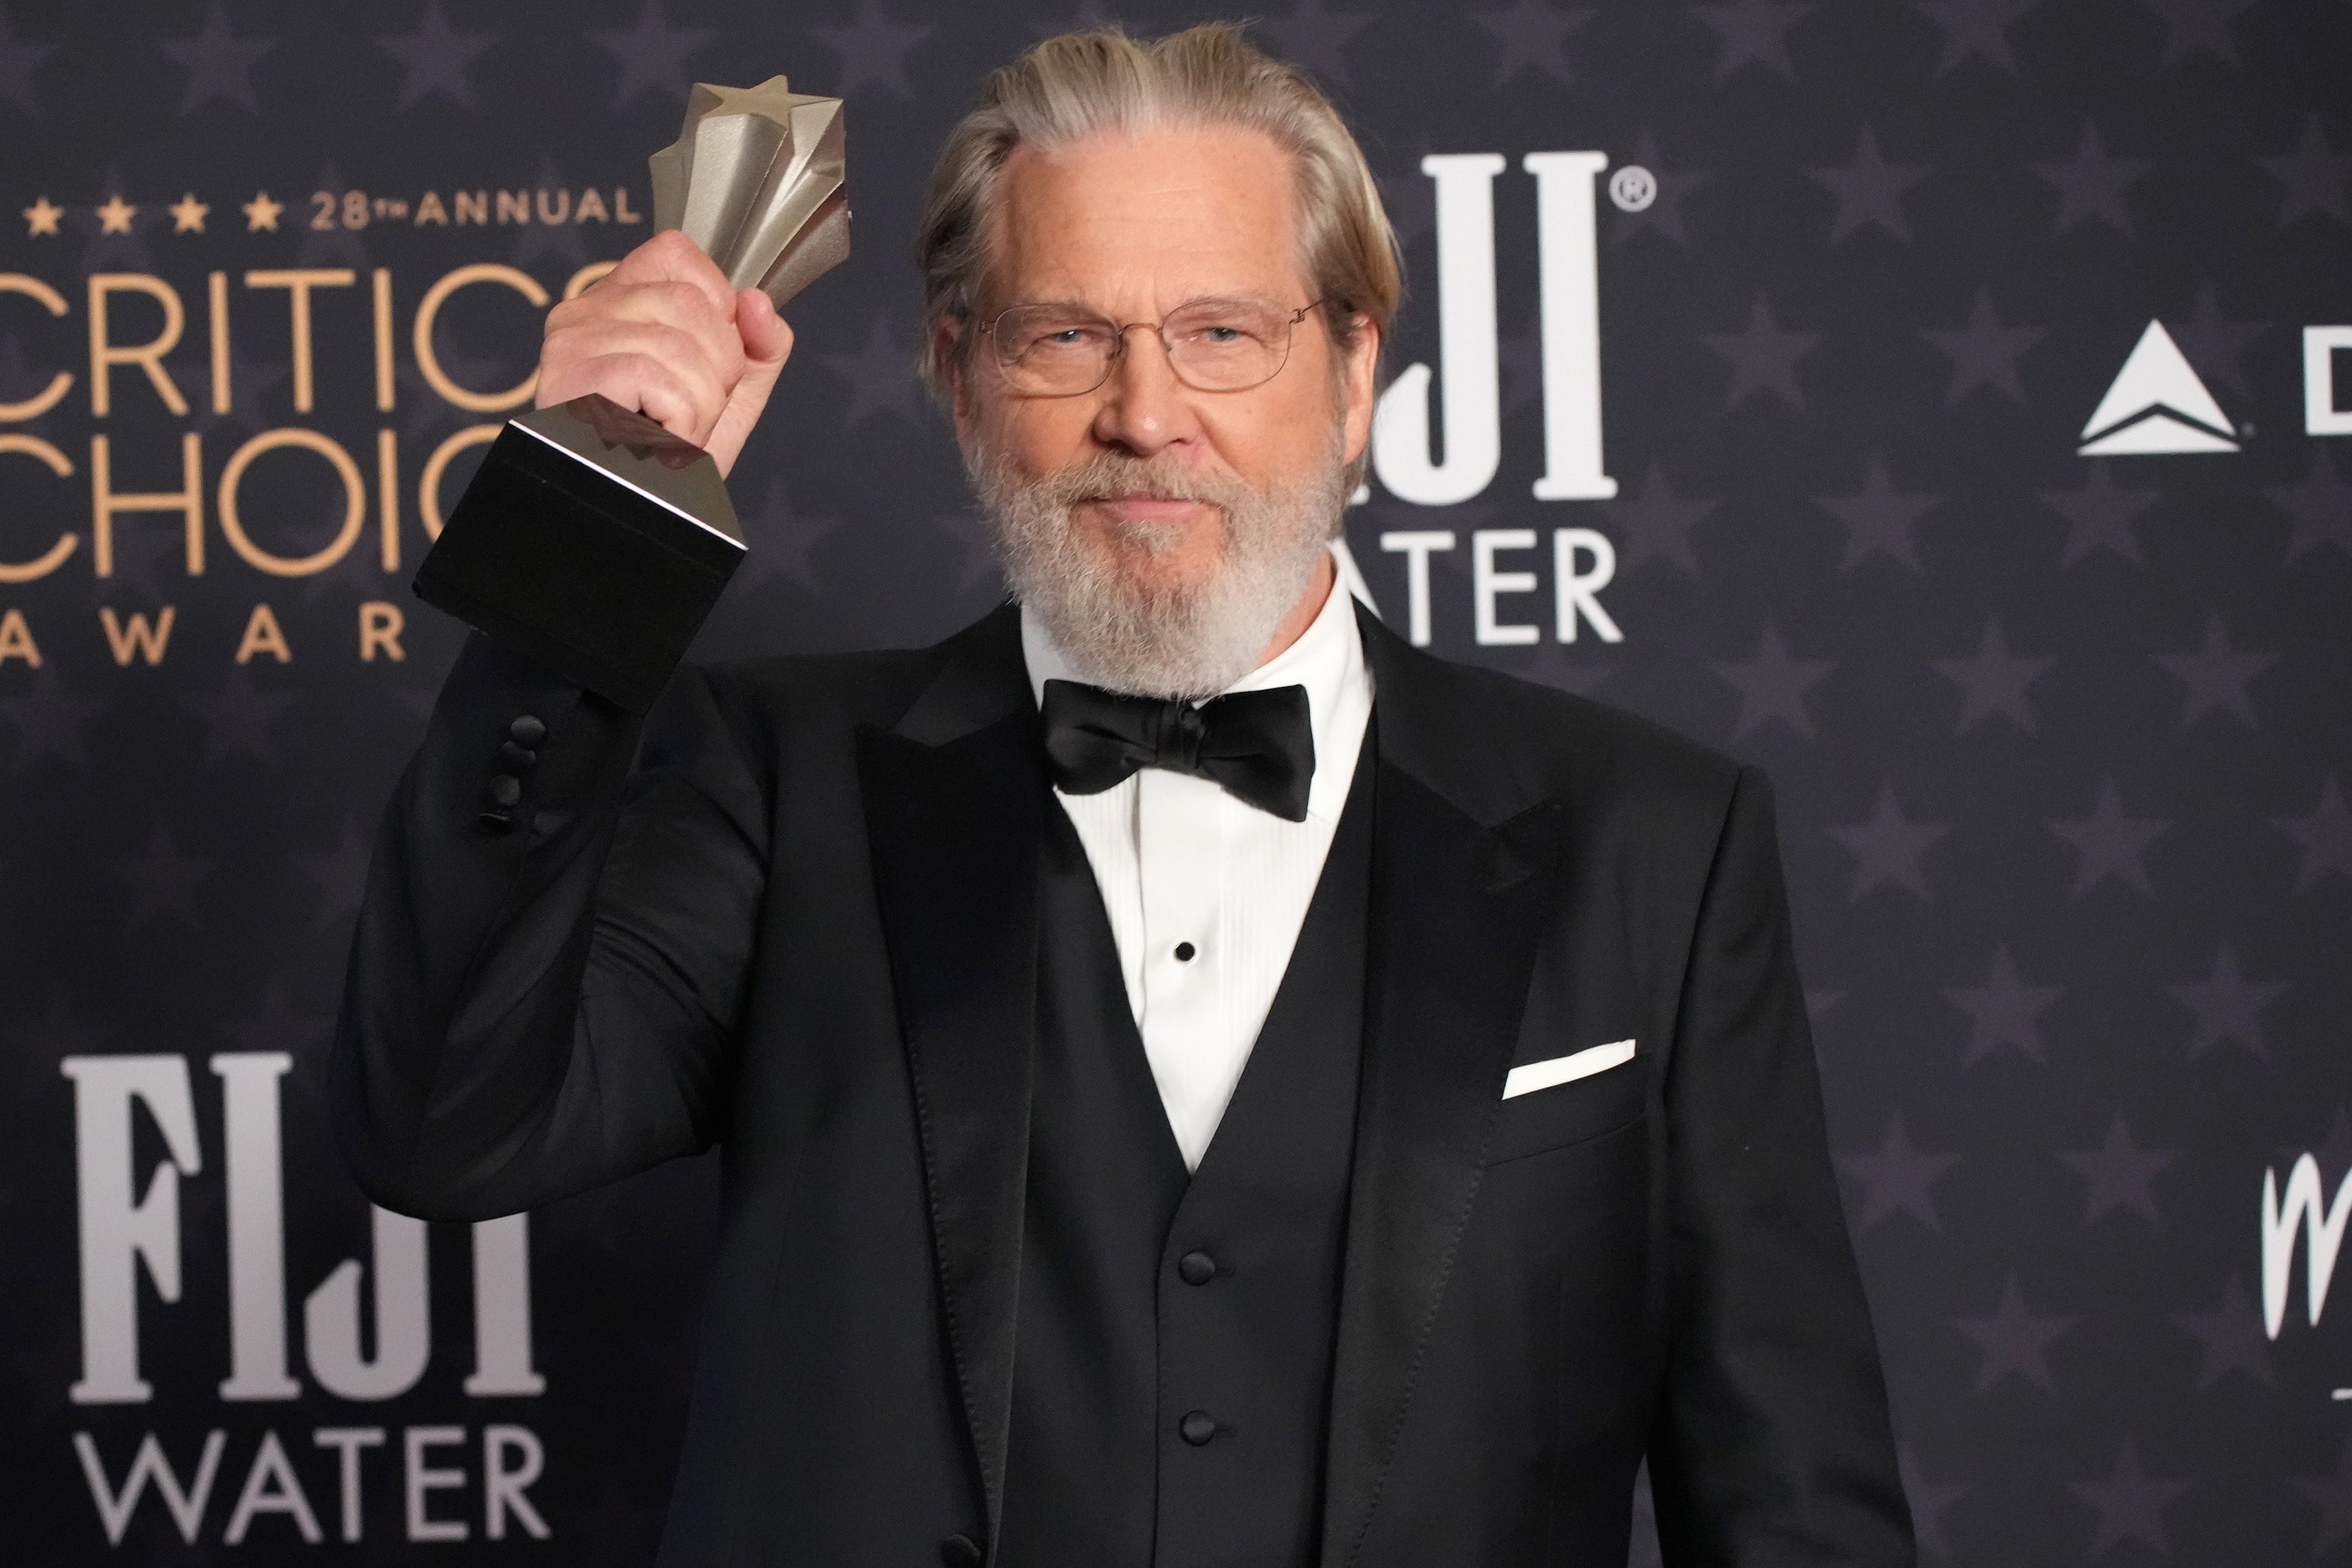 Jeff Bridges at the 28th Annual Critics Choice Awards at Fairmont Century Plaza on January 15, 2023 in Los Angeles, California | Source: Getty Images